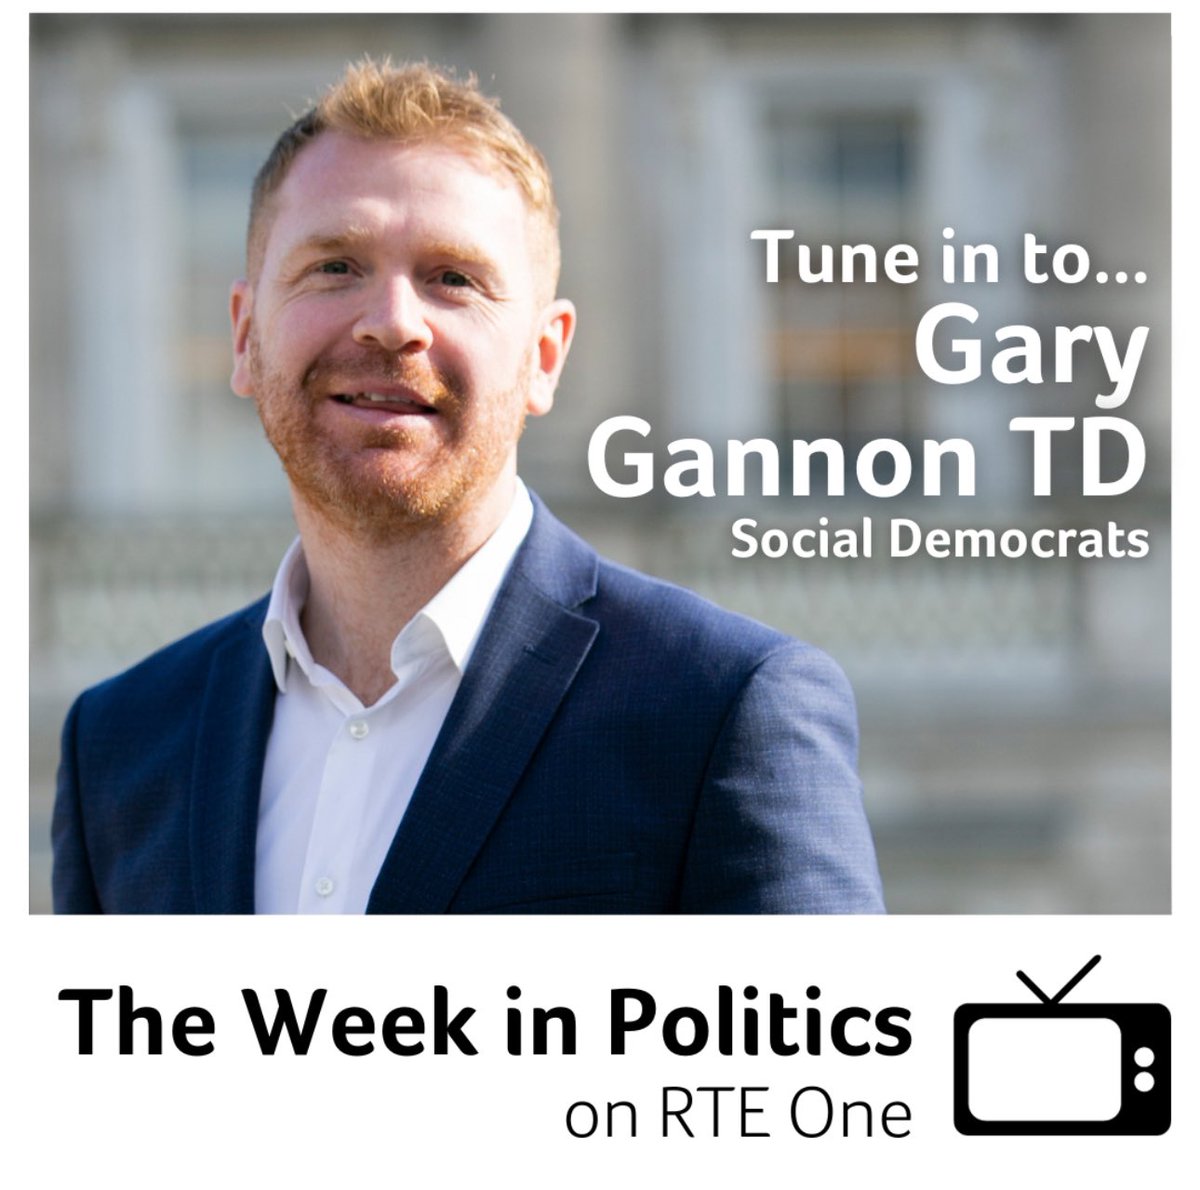 Coming up on @rtetwip, @GaryGannonTD will be joining the show. Tune in from 12pm 📺